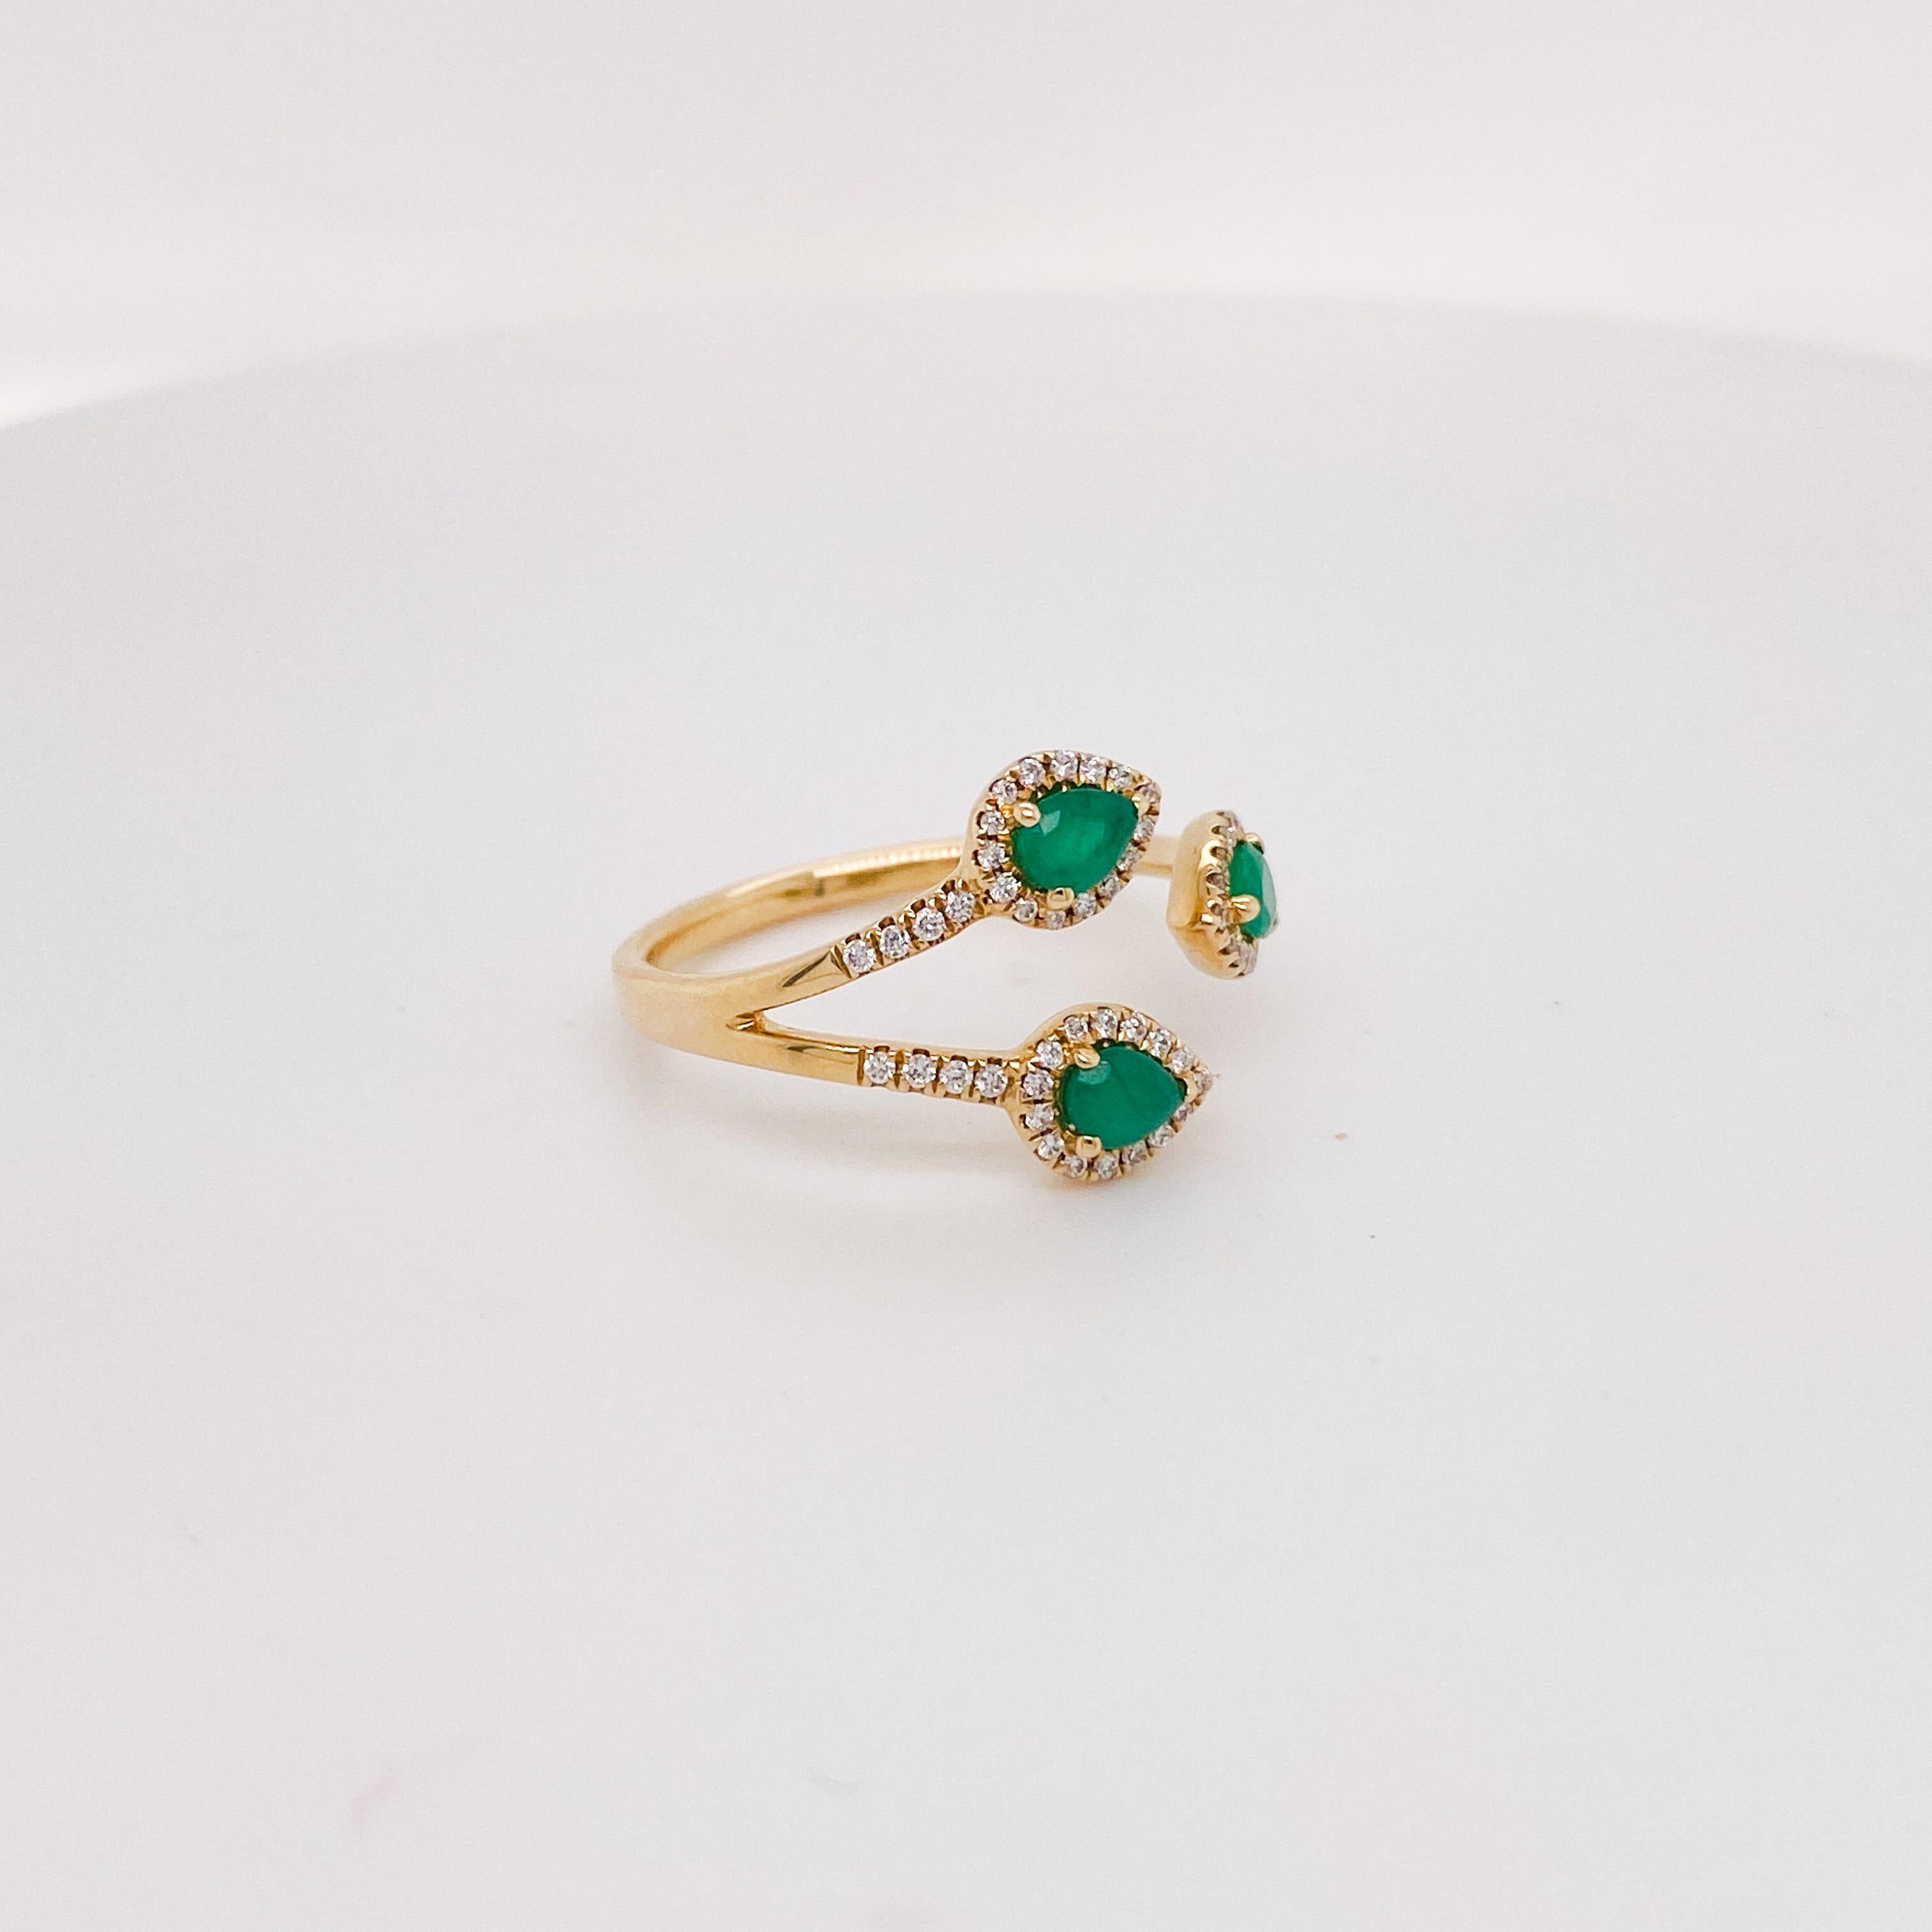 For Sale:  Negative Space Emerald & Diamond Ring Pear Shaped Diamond Halo Ring Sizable 2